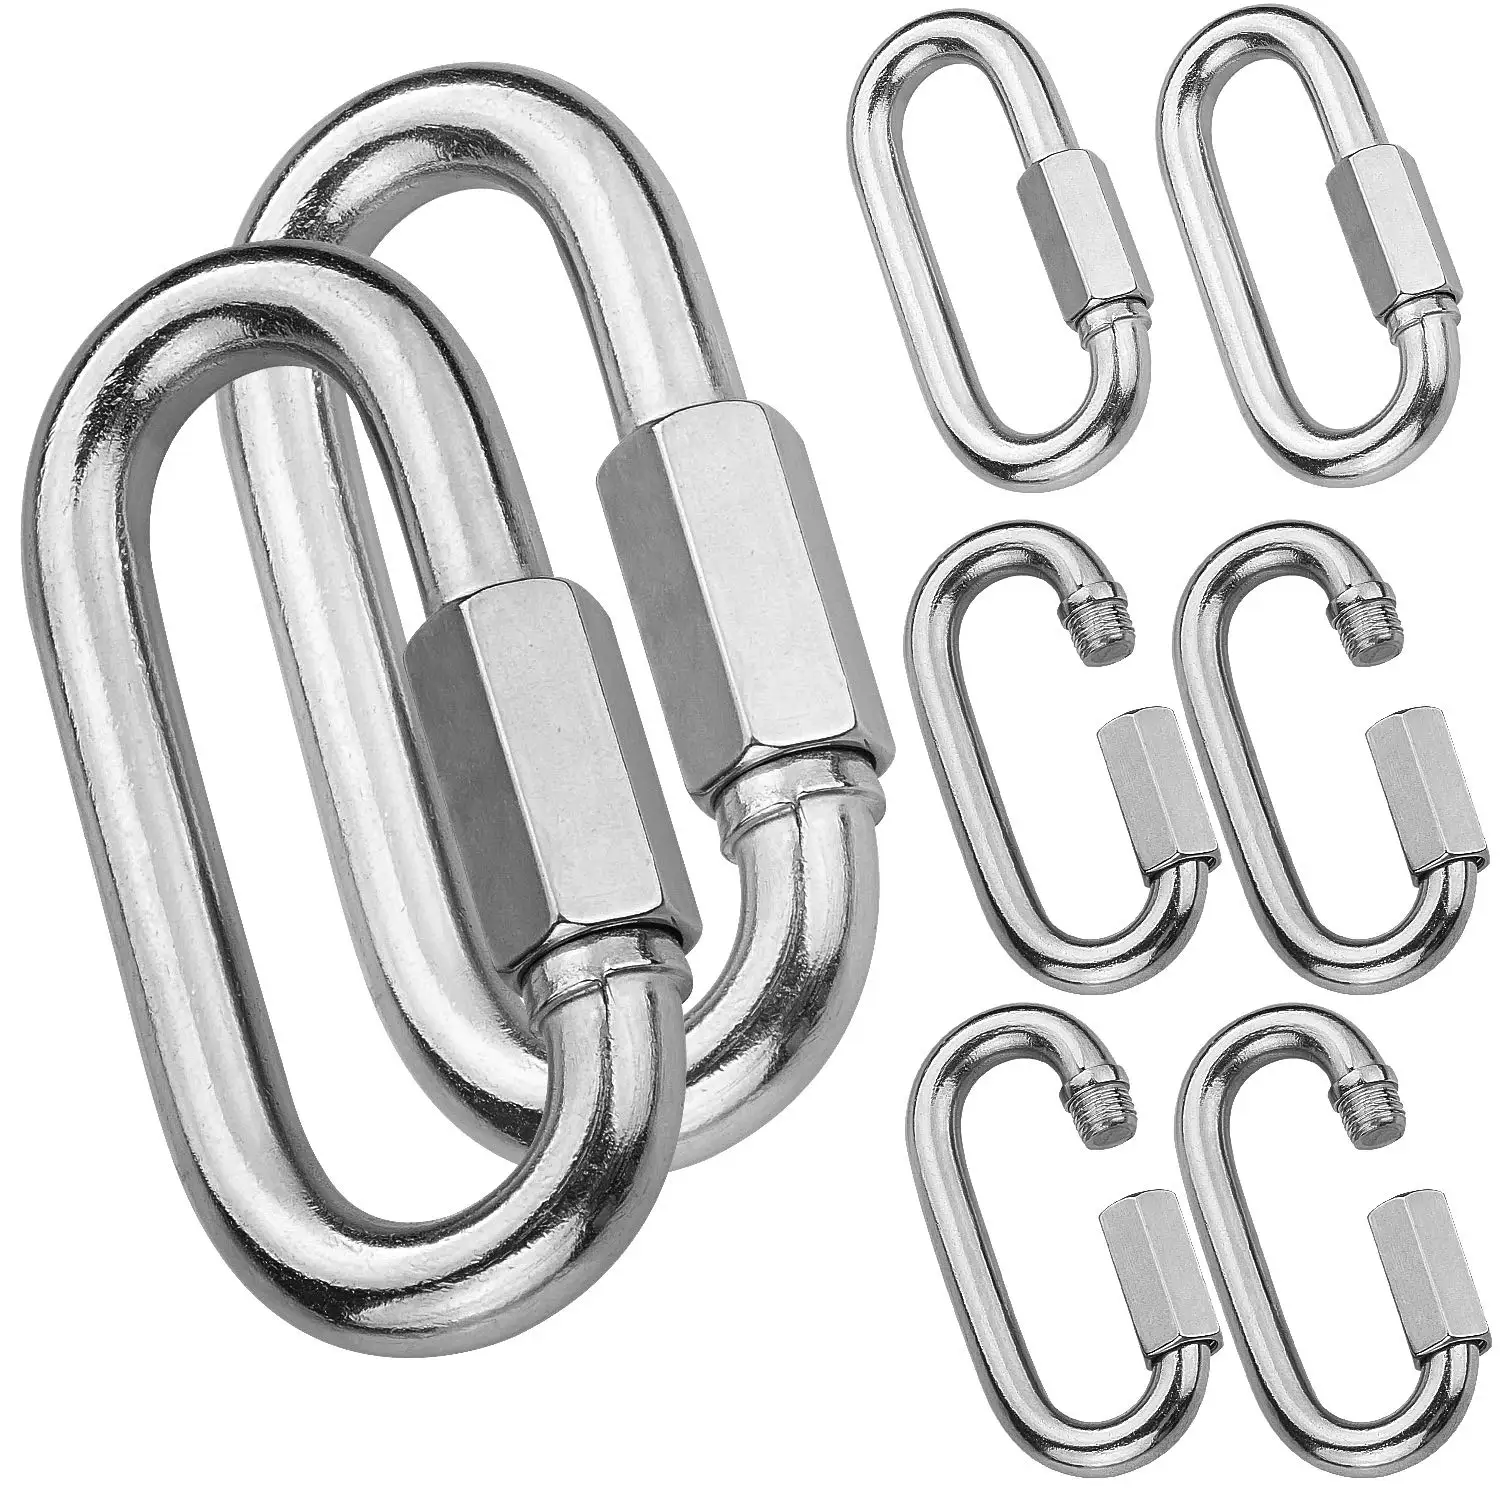 Stainless Steel 316 Oval Quick Link Chain Fastener Marine Hook Carabiner 6mm 